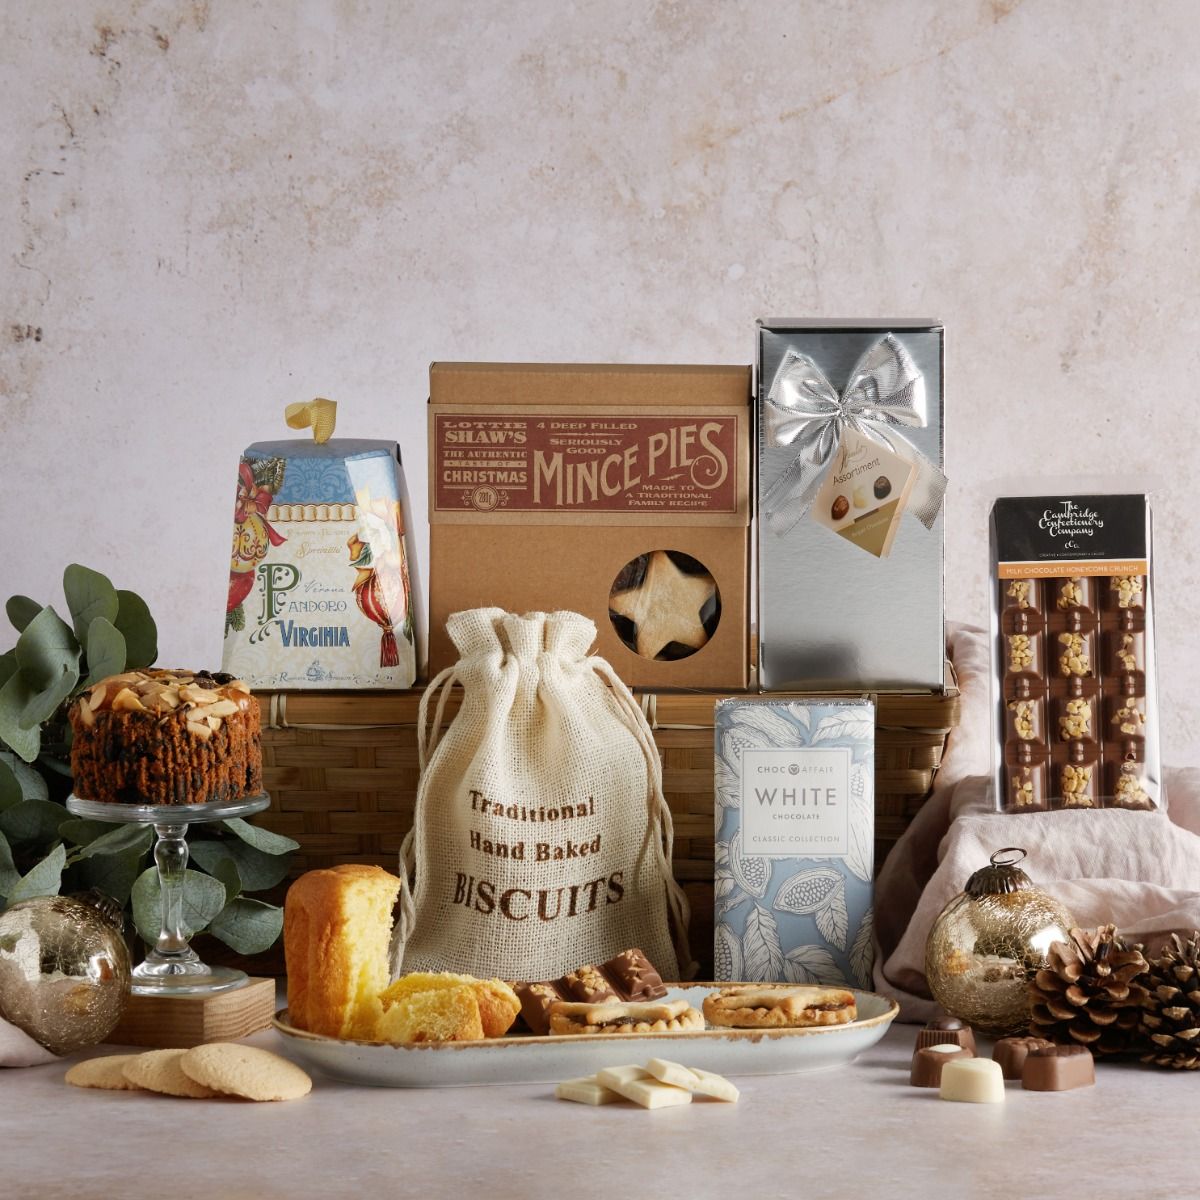 The White Christmas Hamper with contents on display, including a bamboo tray